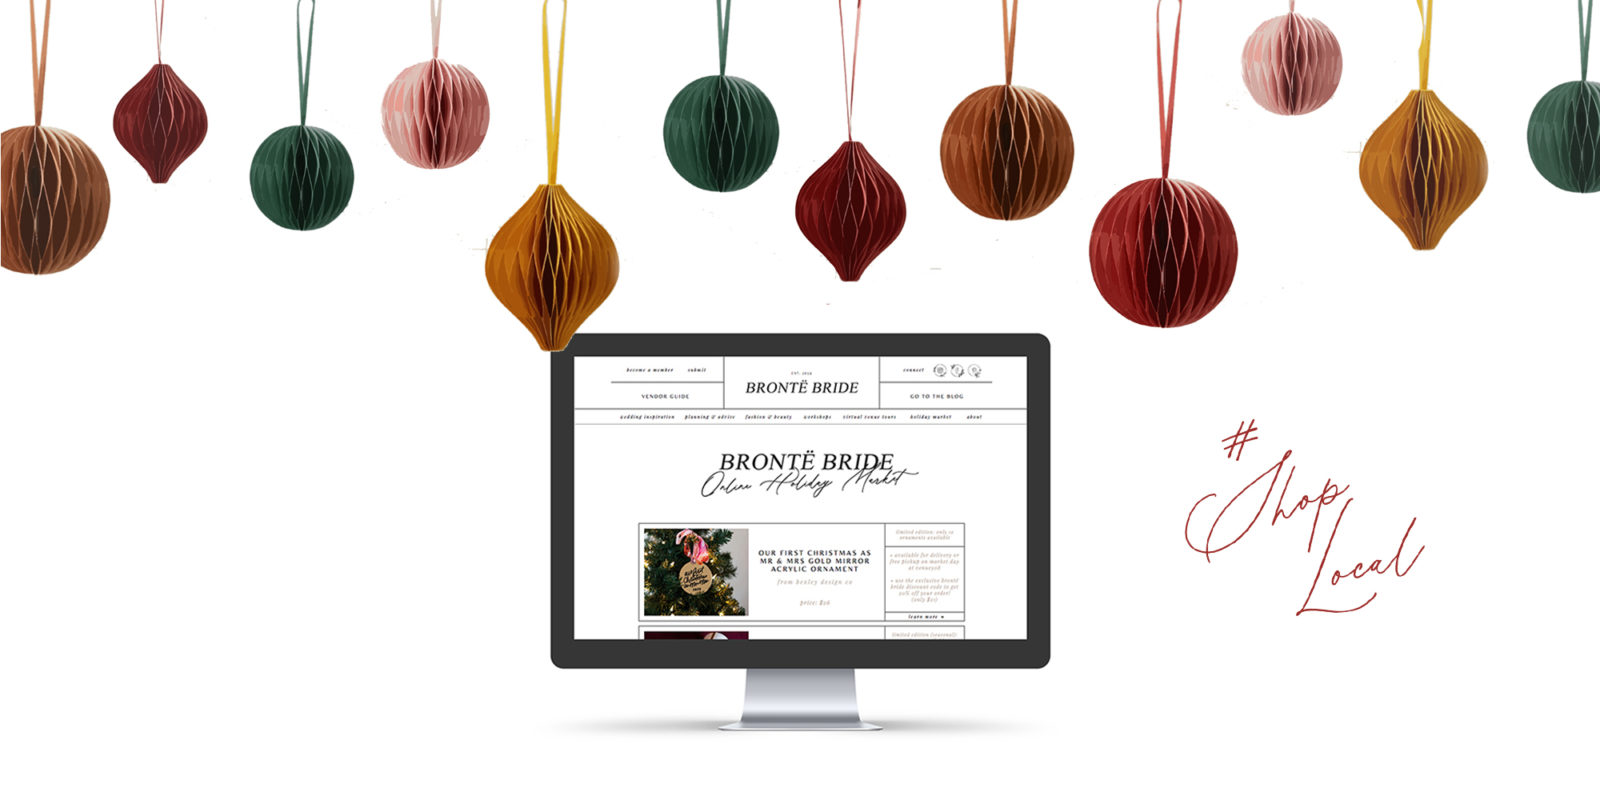 #letsshoplocal!
Calgary gifts and goods on the Bronte Bride Online Holiday Market